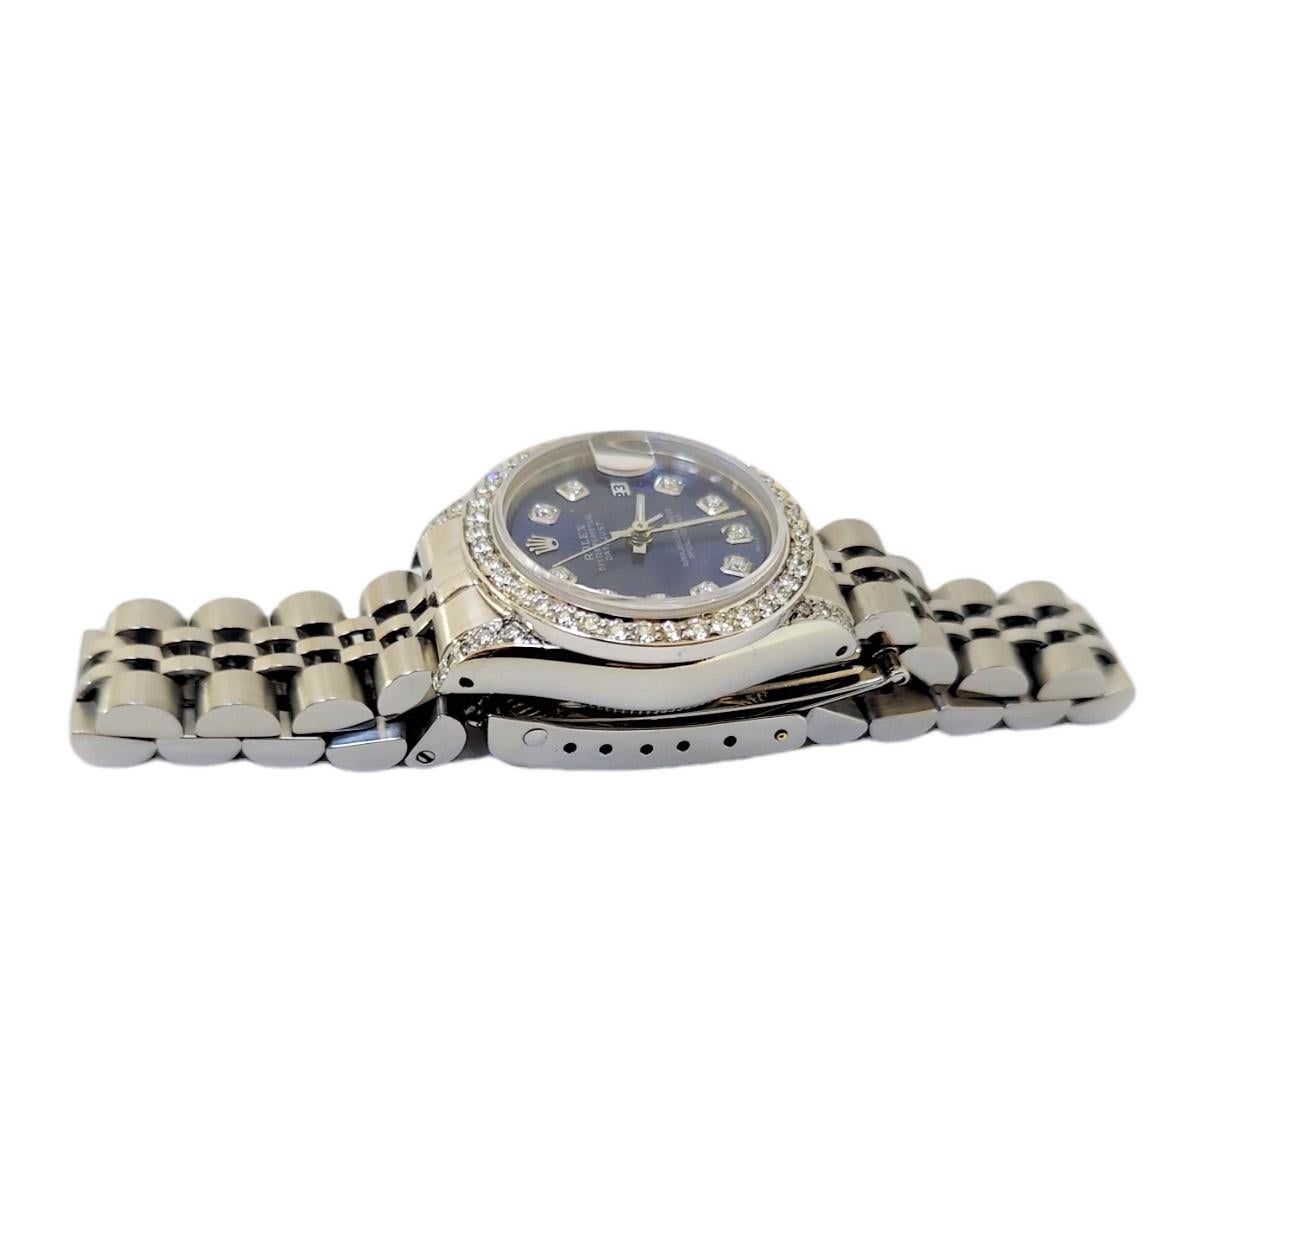 Gender - Ladies
Condition - Pre owned
Model - 69174 datejust
Metals - stainless steel
Case size - 26mm
Crystal - Sapphire
Bezel - custom steel 1CT diamond
Movement - automatic caliber 2135
Dial - refinished Blue diamond
Wrist band - stainless steel